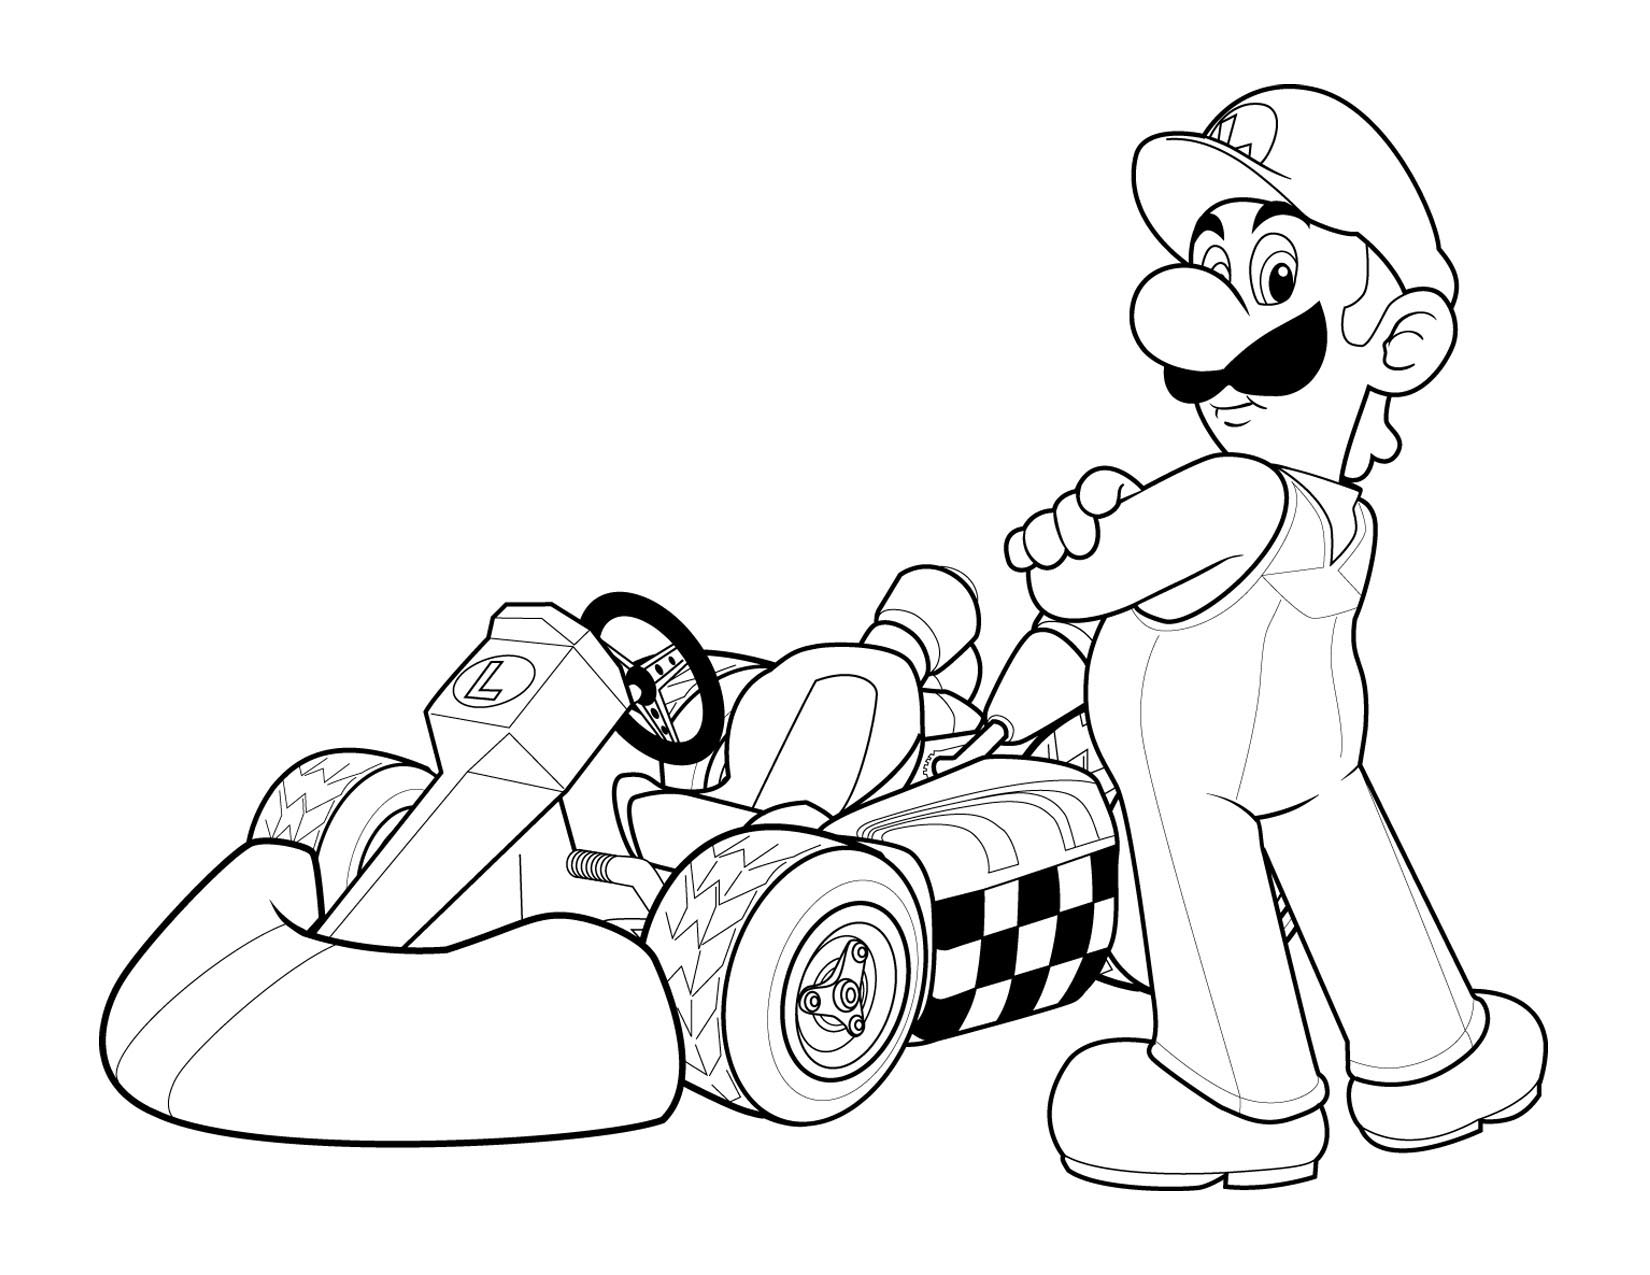 Super Mario Coloring in Pages 2